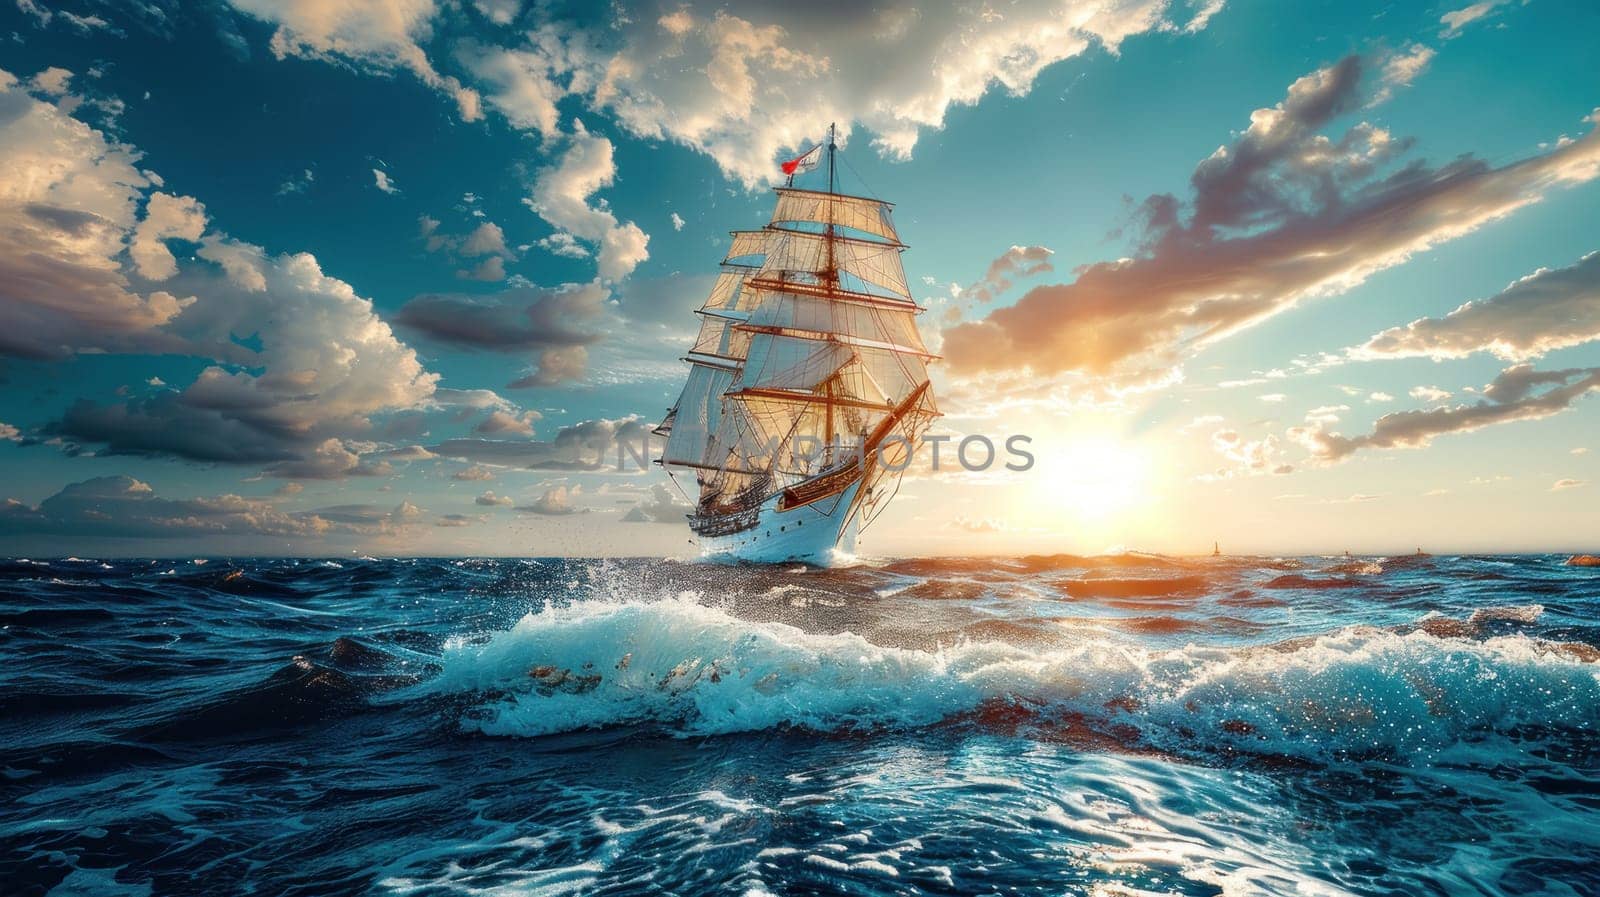 A large ship sails through the ocean with a bright sun shining on it.